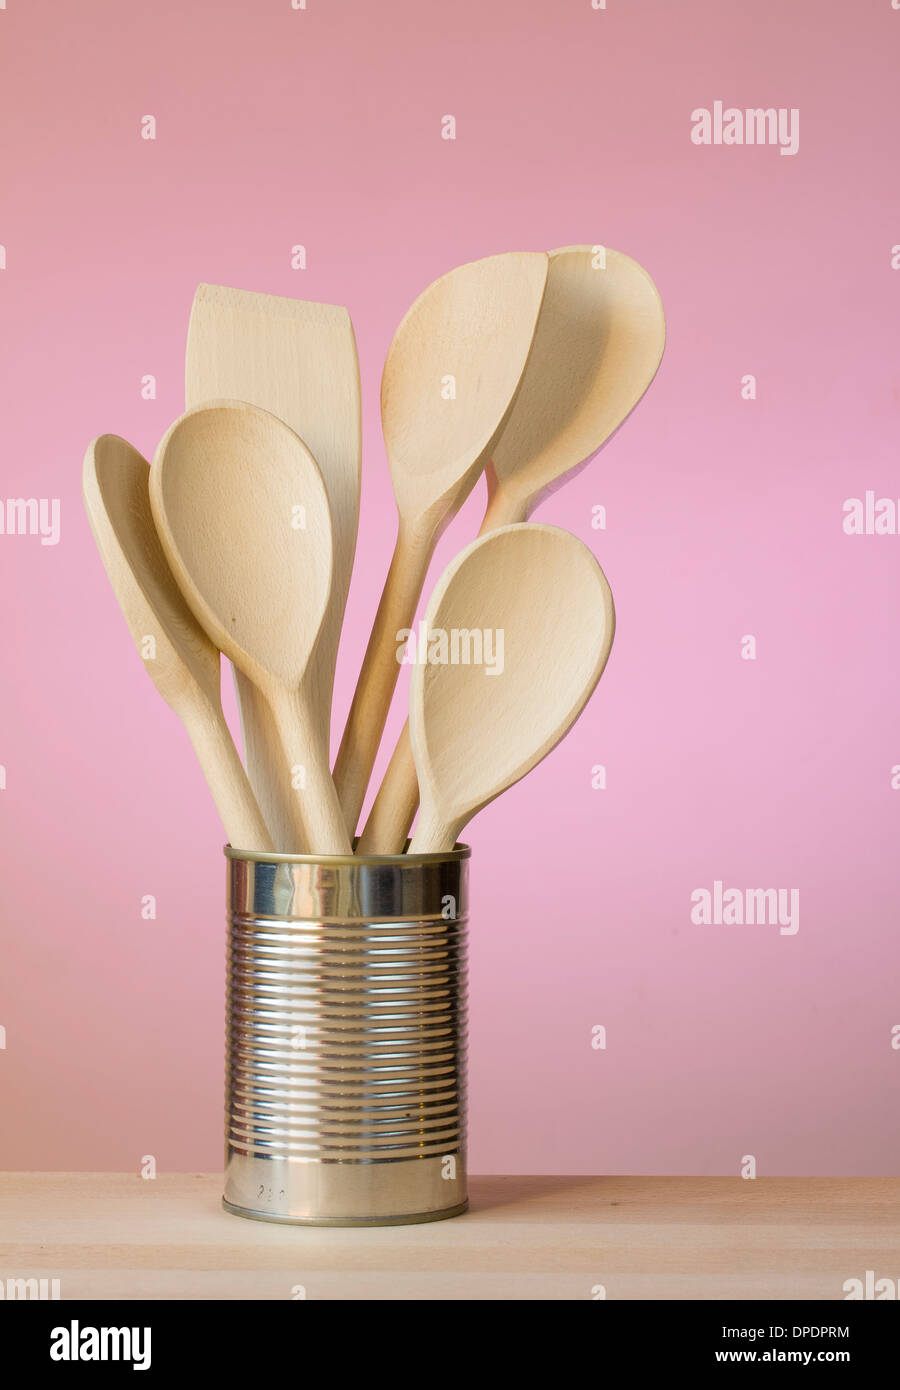 Kitchen utensils in a can with wall behind Stock Photo